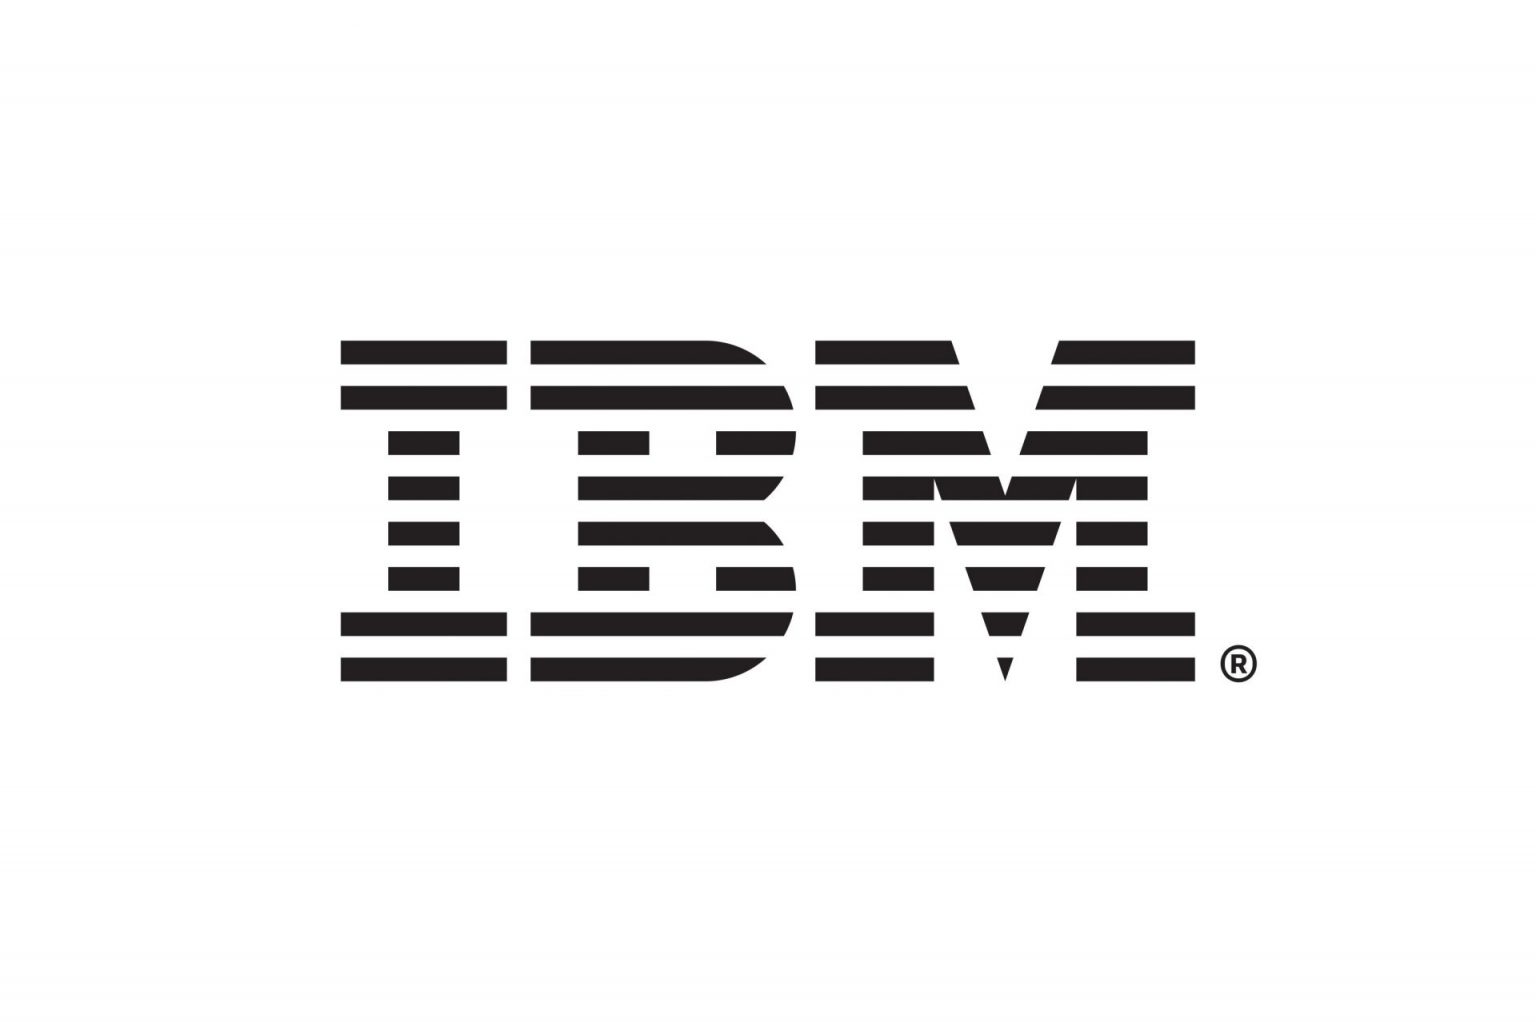 Software and Consulting Power IBM's Earnings Beat